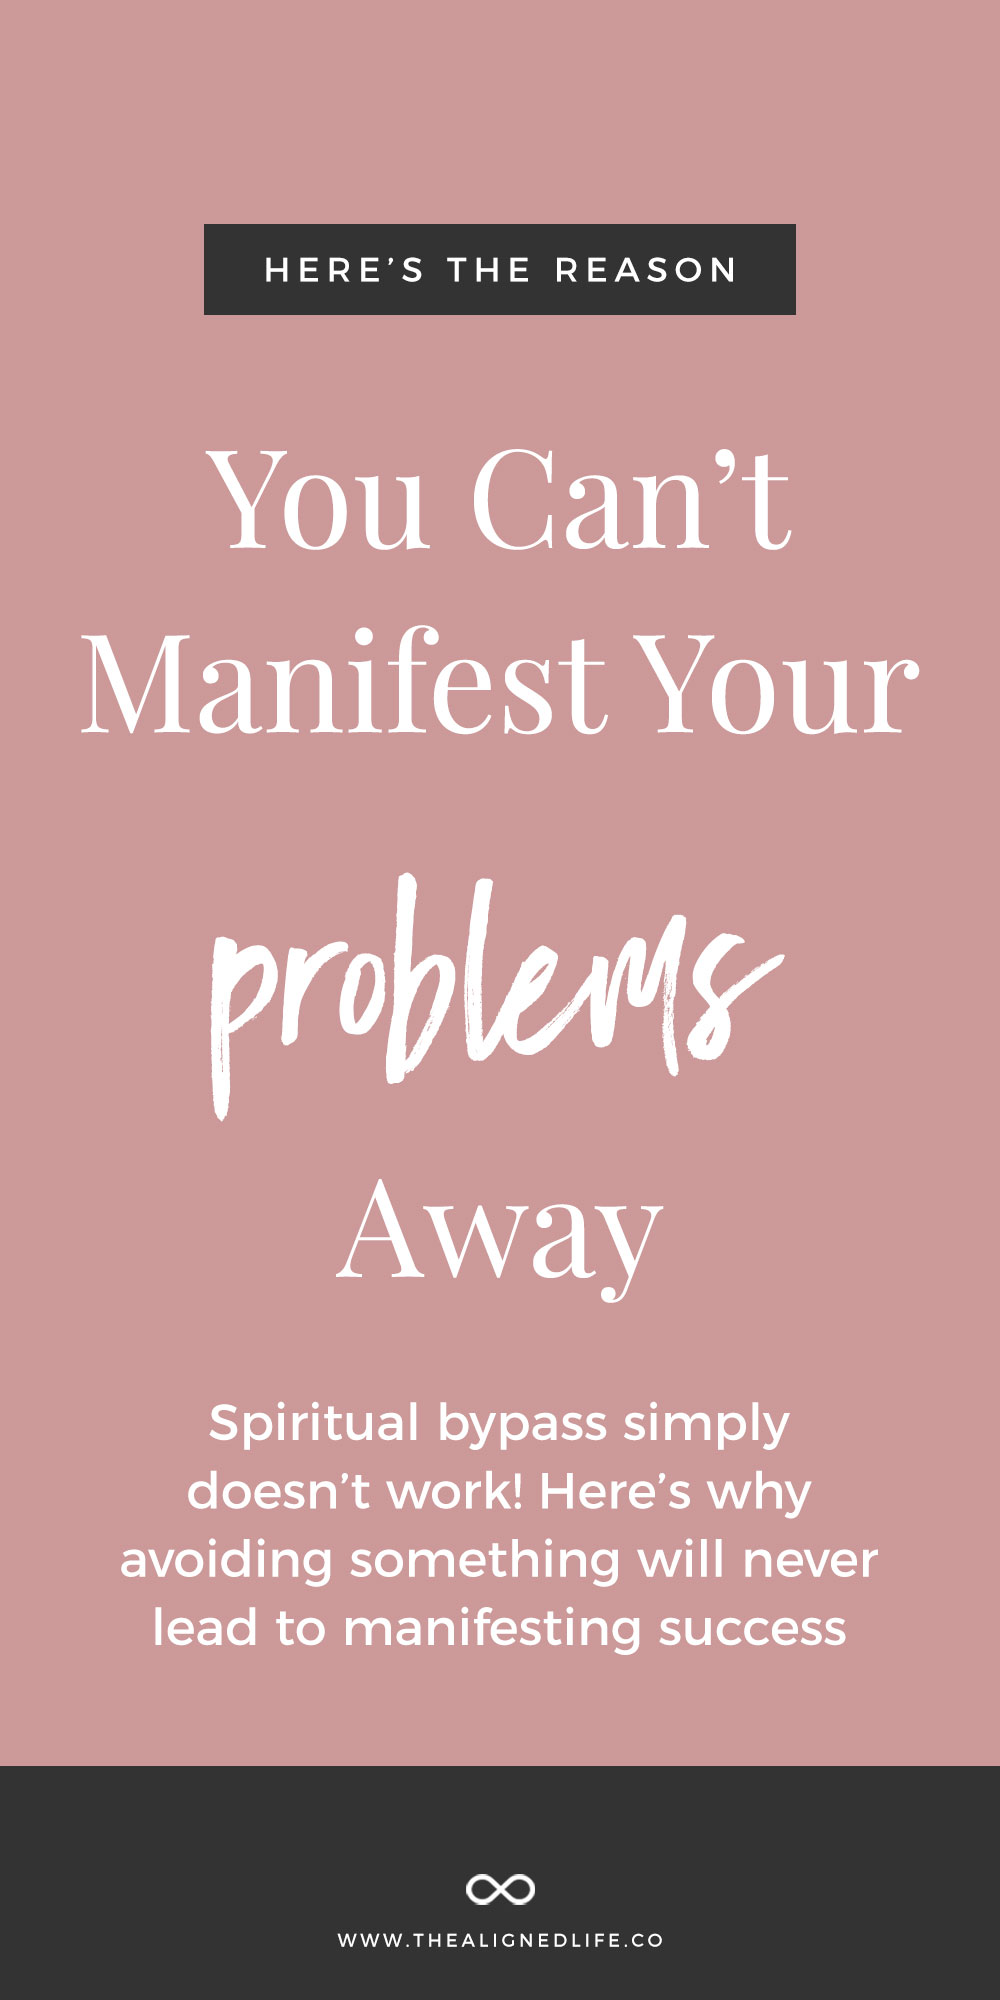 The Reason You Can't Manifest Your Problems Away: Avoidance + The Law of Attraction